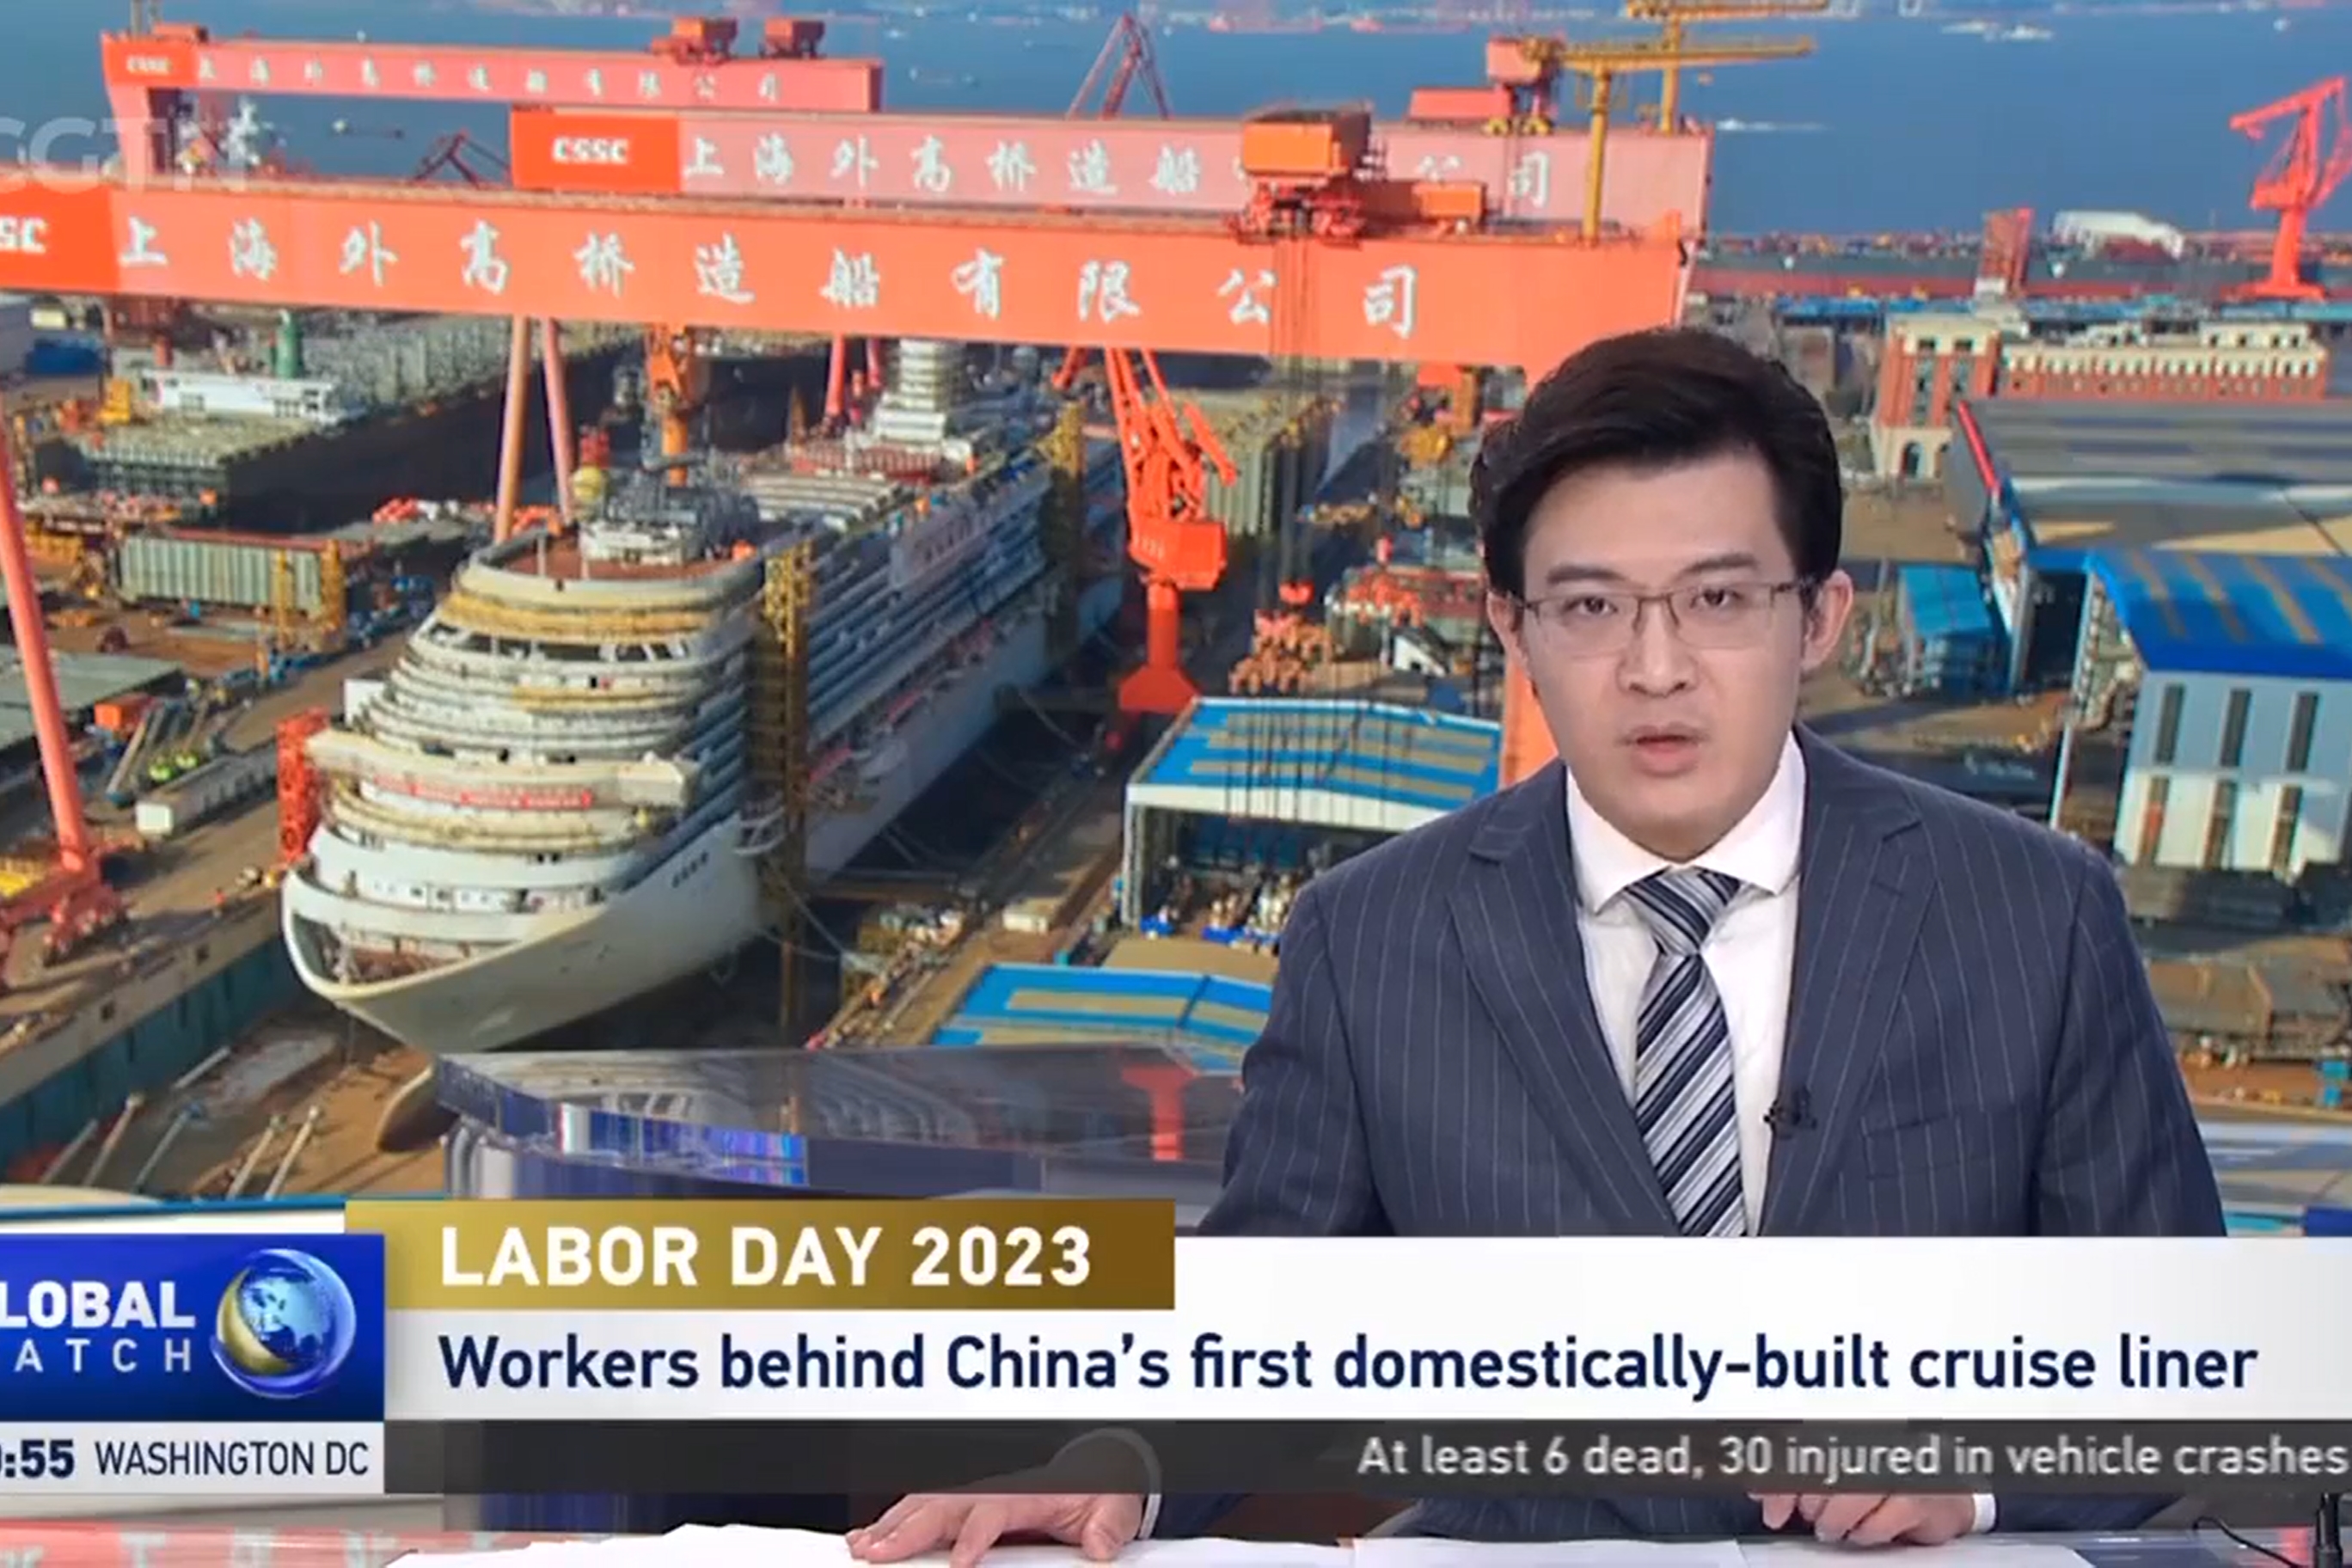 CGNT: Workers behind China's first domestically-built cruise liner